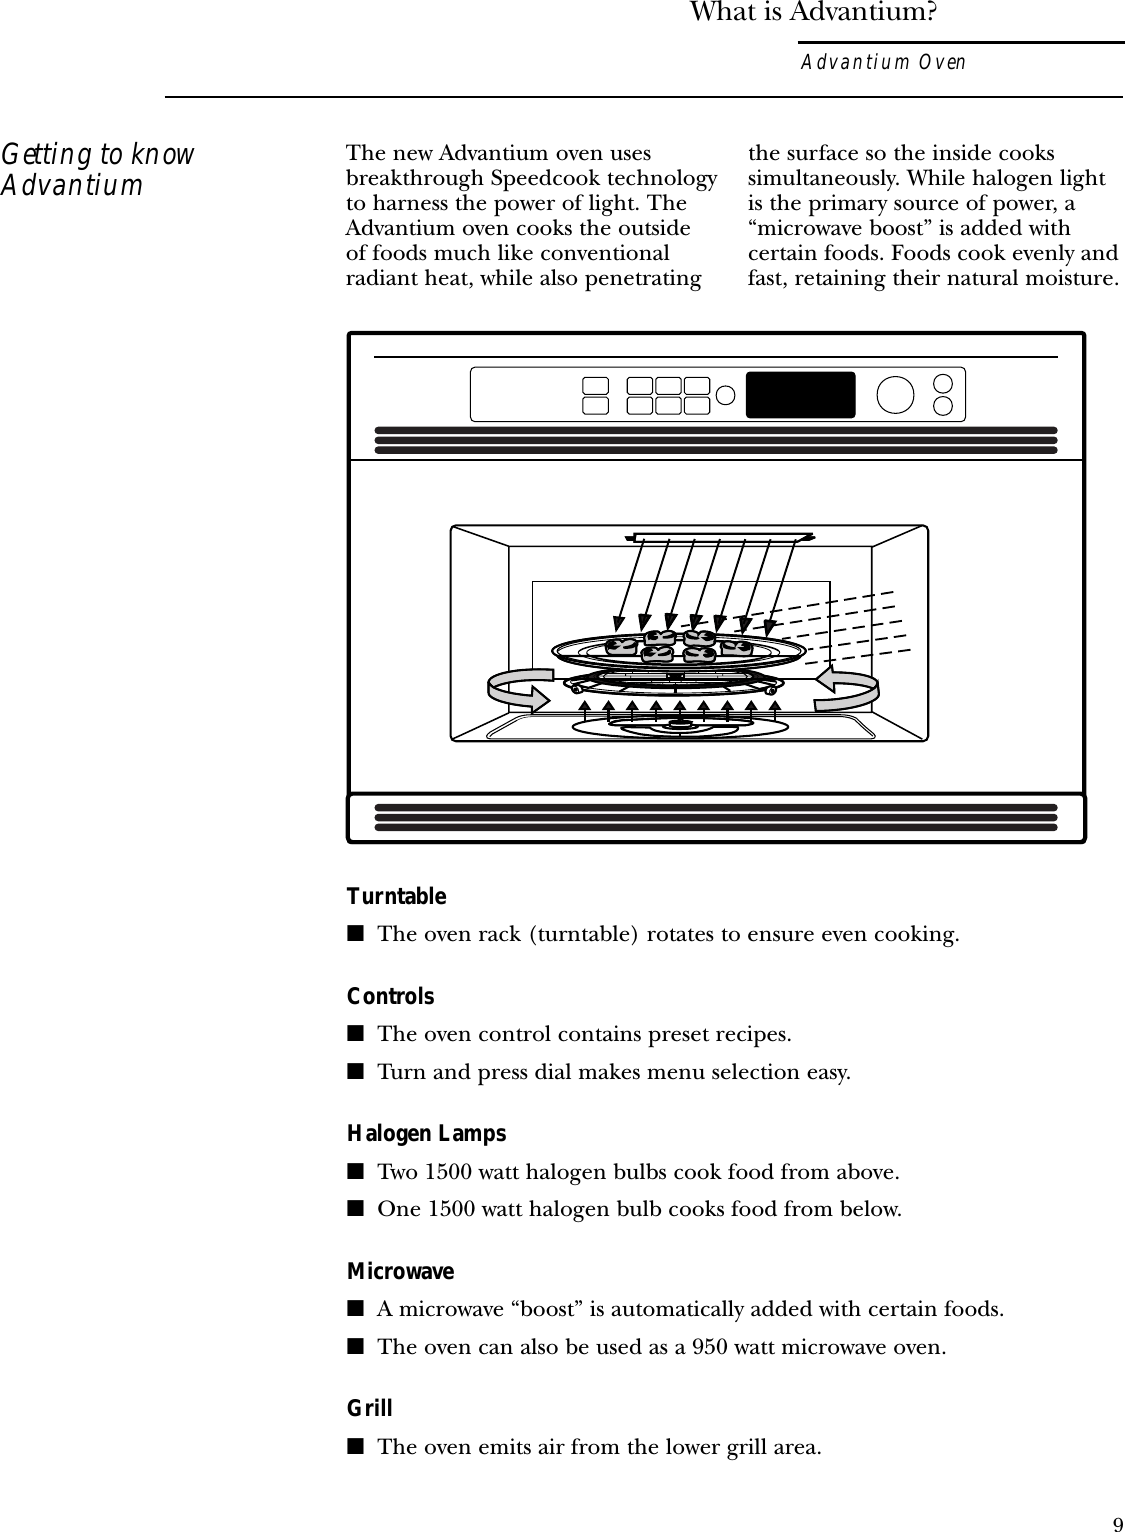 What is Advantium?Advantium OvenThe new Advantium oven usesbreakthrough Speedcook technologyto harness the power of light. TheAdvantium oven cooks the outside of foods much like conventionalradiant heat, while also penetratingthe surface so the inside cookssimultaneously. While halogen lightis the primary source of power, a“microwave boost” is added withcertain foods. Foods cook evenly andfast, retaining their natural moisture.Turntable■The oven rack (turntable) rotates to ensure even cooking.Controls■The oven control contains preset recipes.■Turn and press dial makes menu selection easy.Halogen Lamps■Two 1500 watt halogen bulbs cook food from above.■One 1500 watt halogen bulb cooks food from below.Microwave■A microwave “boost” is automatically added with certain foods.■The oven can also be used as a 950 watt microwave oven.Grill■The oven emits air from the lower grill area.Getting to knowAdvantium9